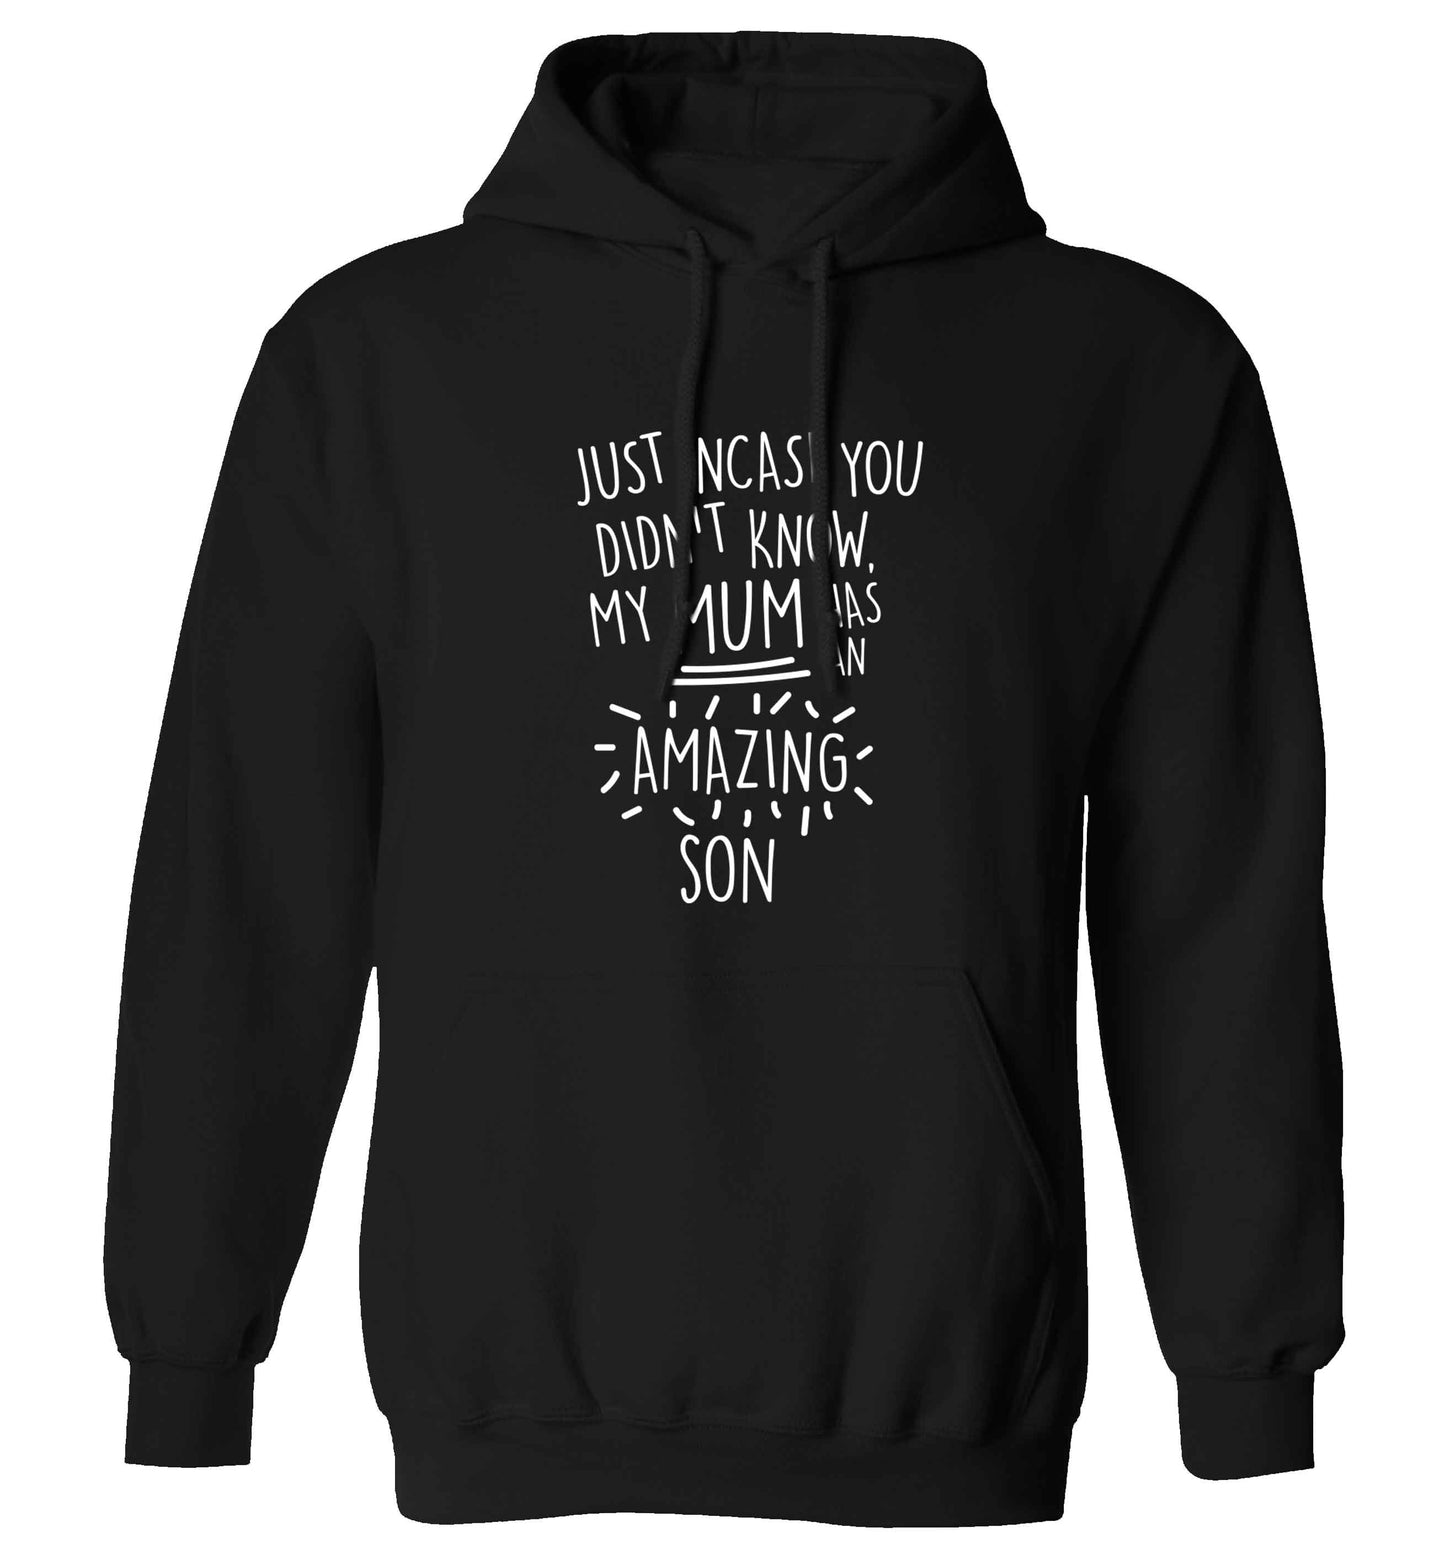 Just incase you didn't know my mum has an amazing son adults unisex black hoodie 2XL